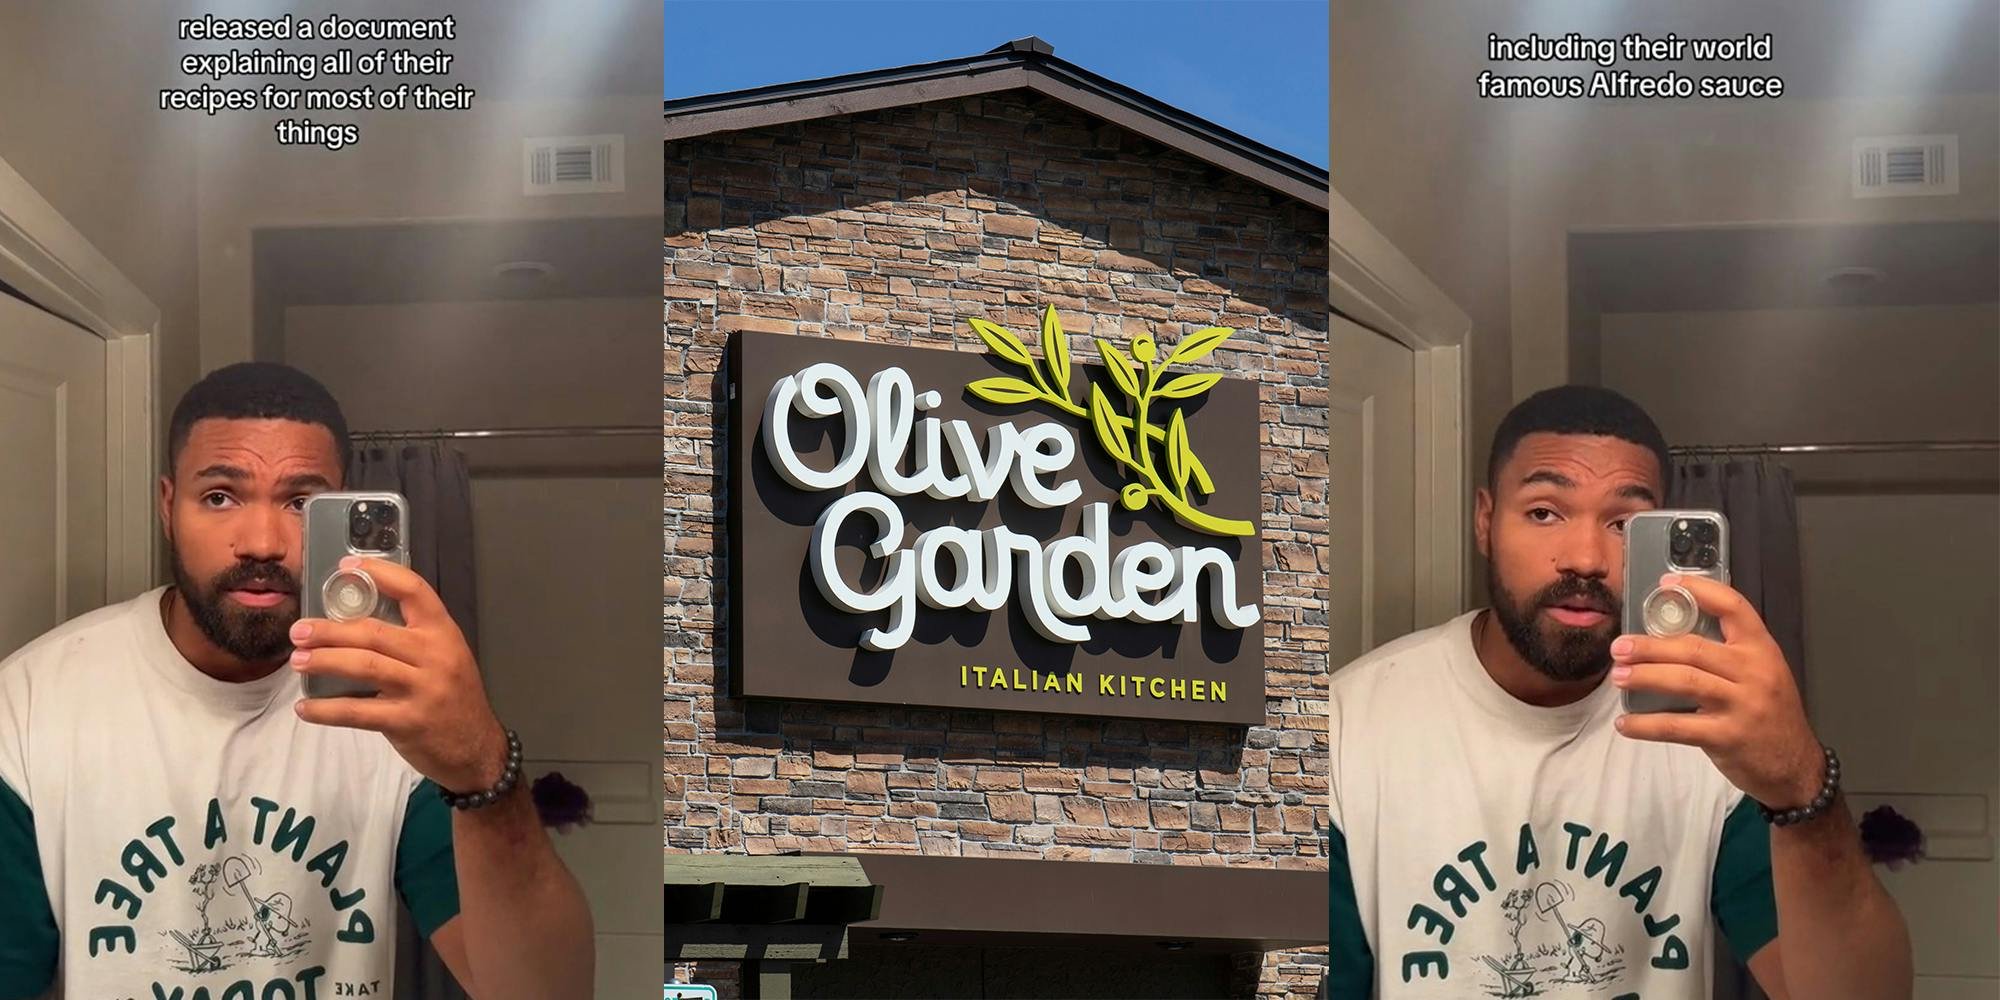 ‘I still have a screenshot’: Customer reveals Olive Garden Alfredo sauce recipe as payback after they double-charge him and don’t refund order